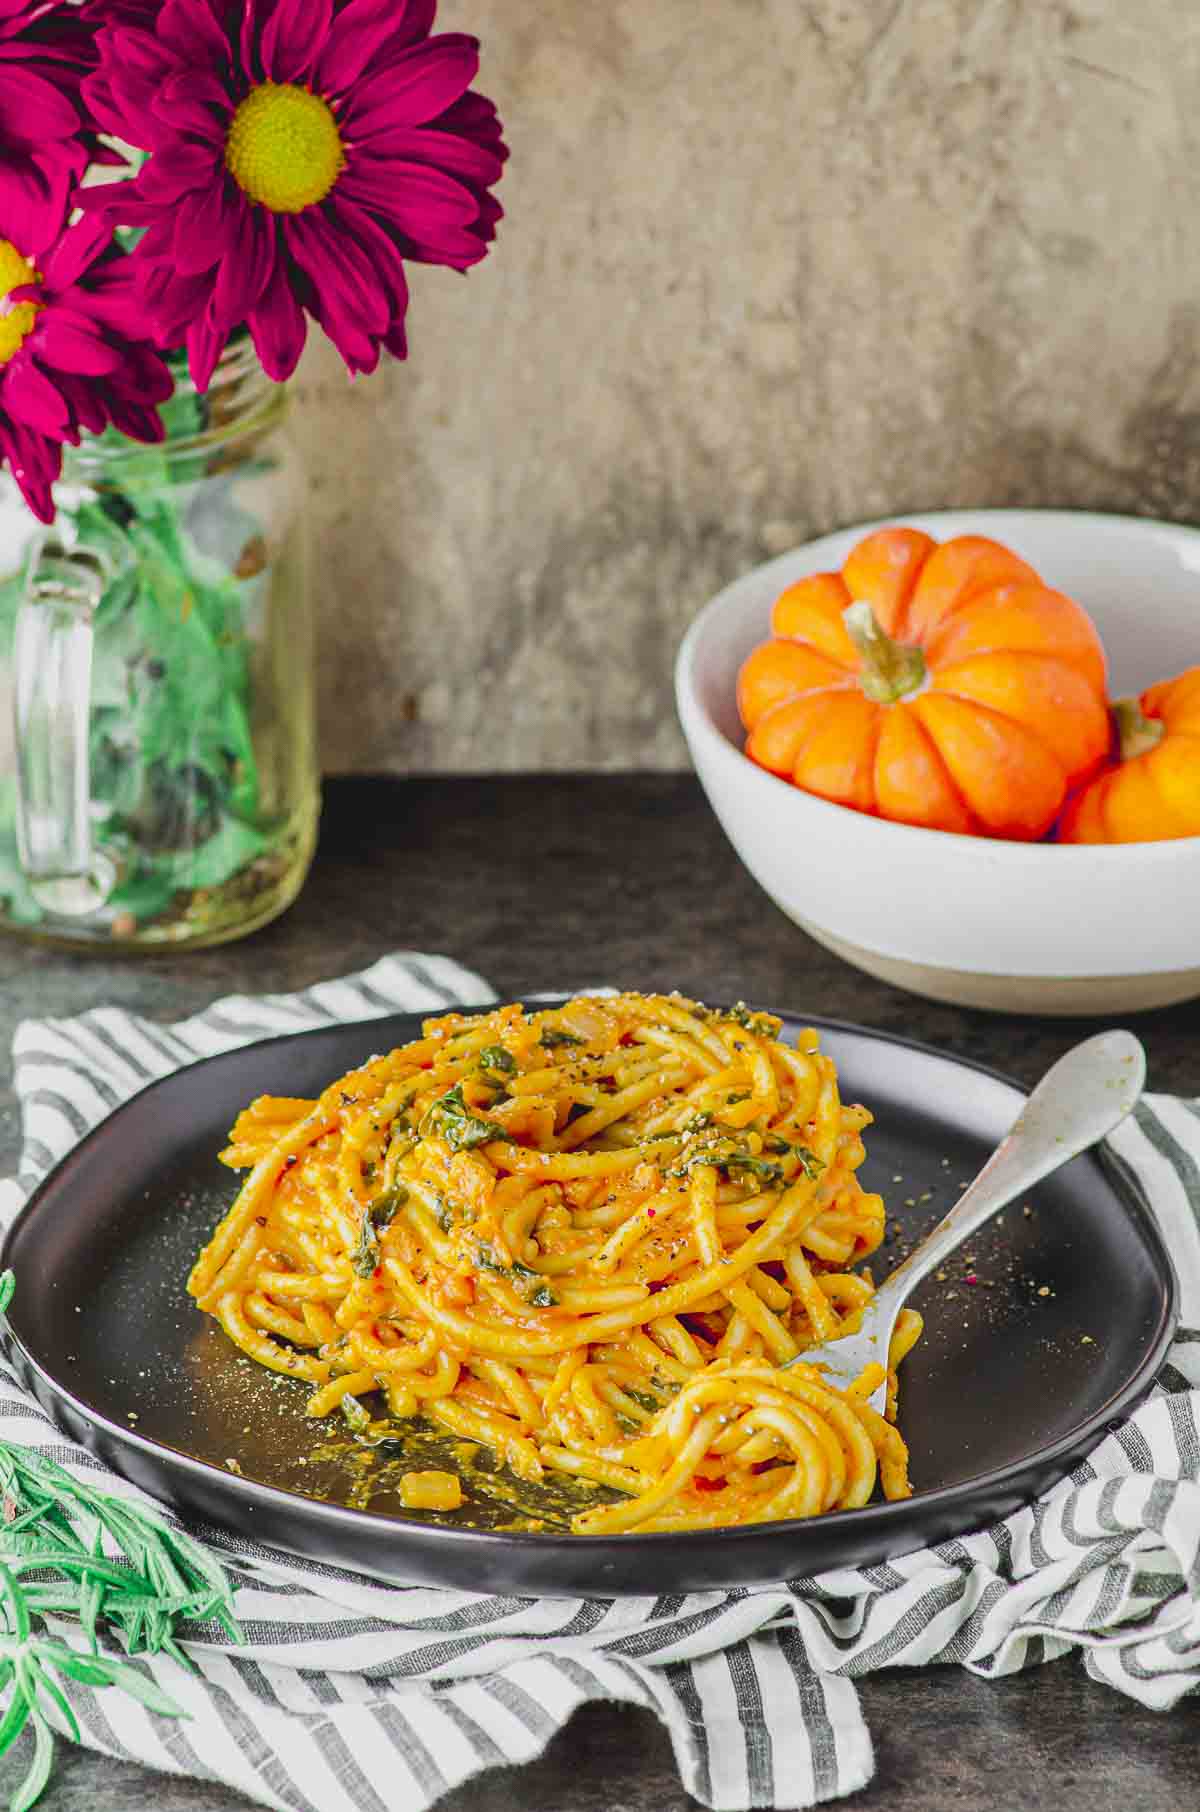 Side view of a plate of spaghetti with pumpkin pasta sauce and a bowl with mini pumpkins on the background